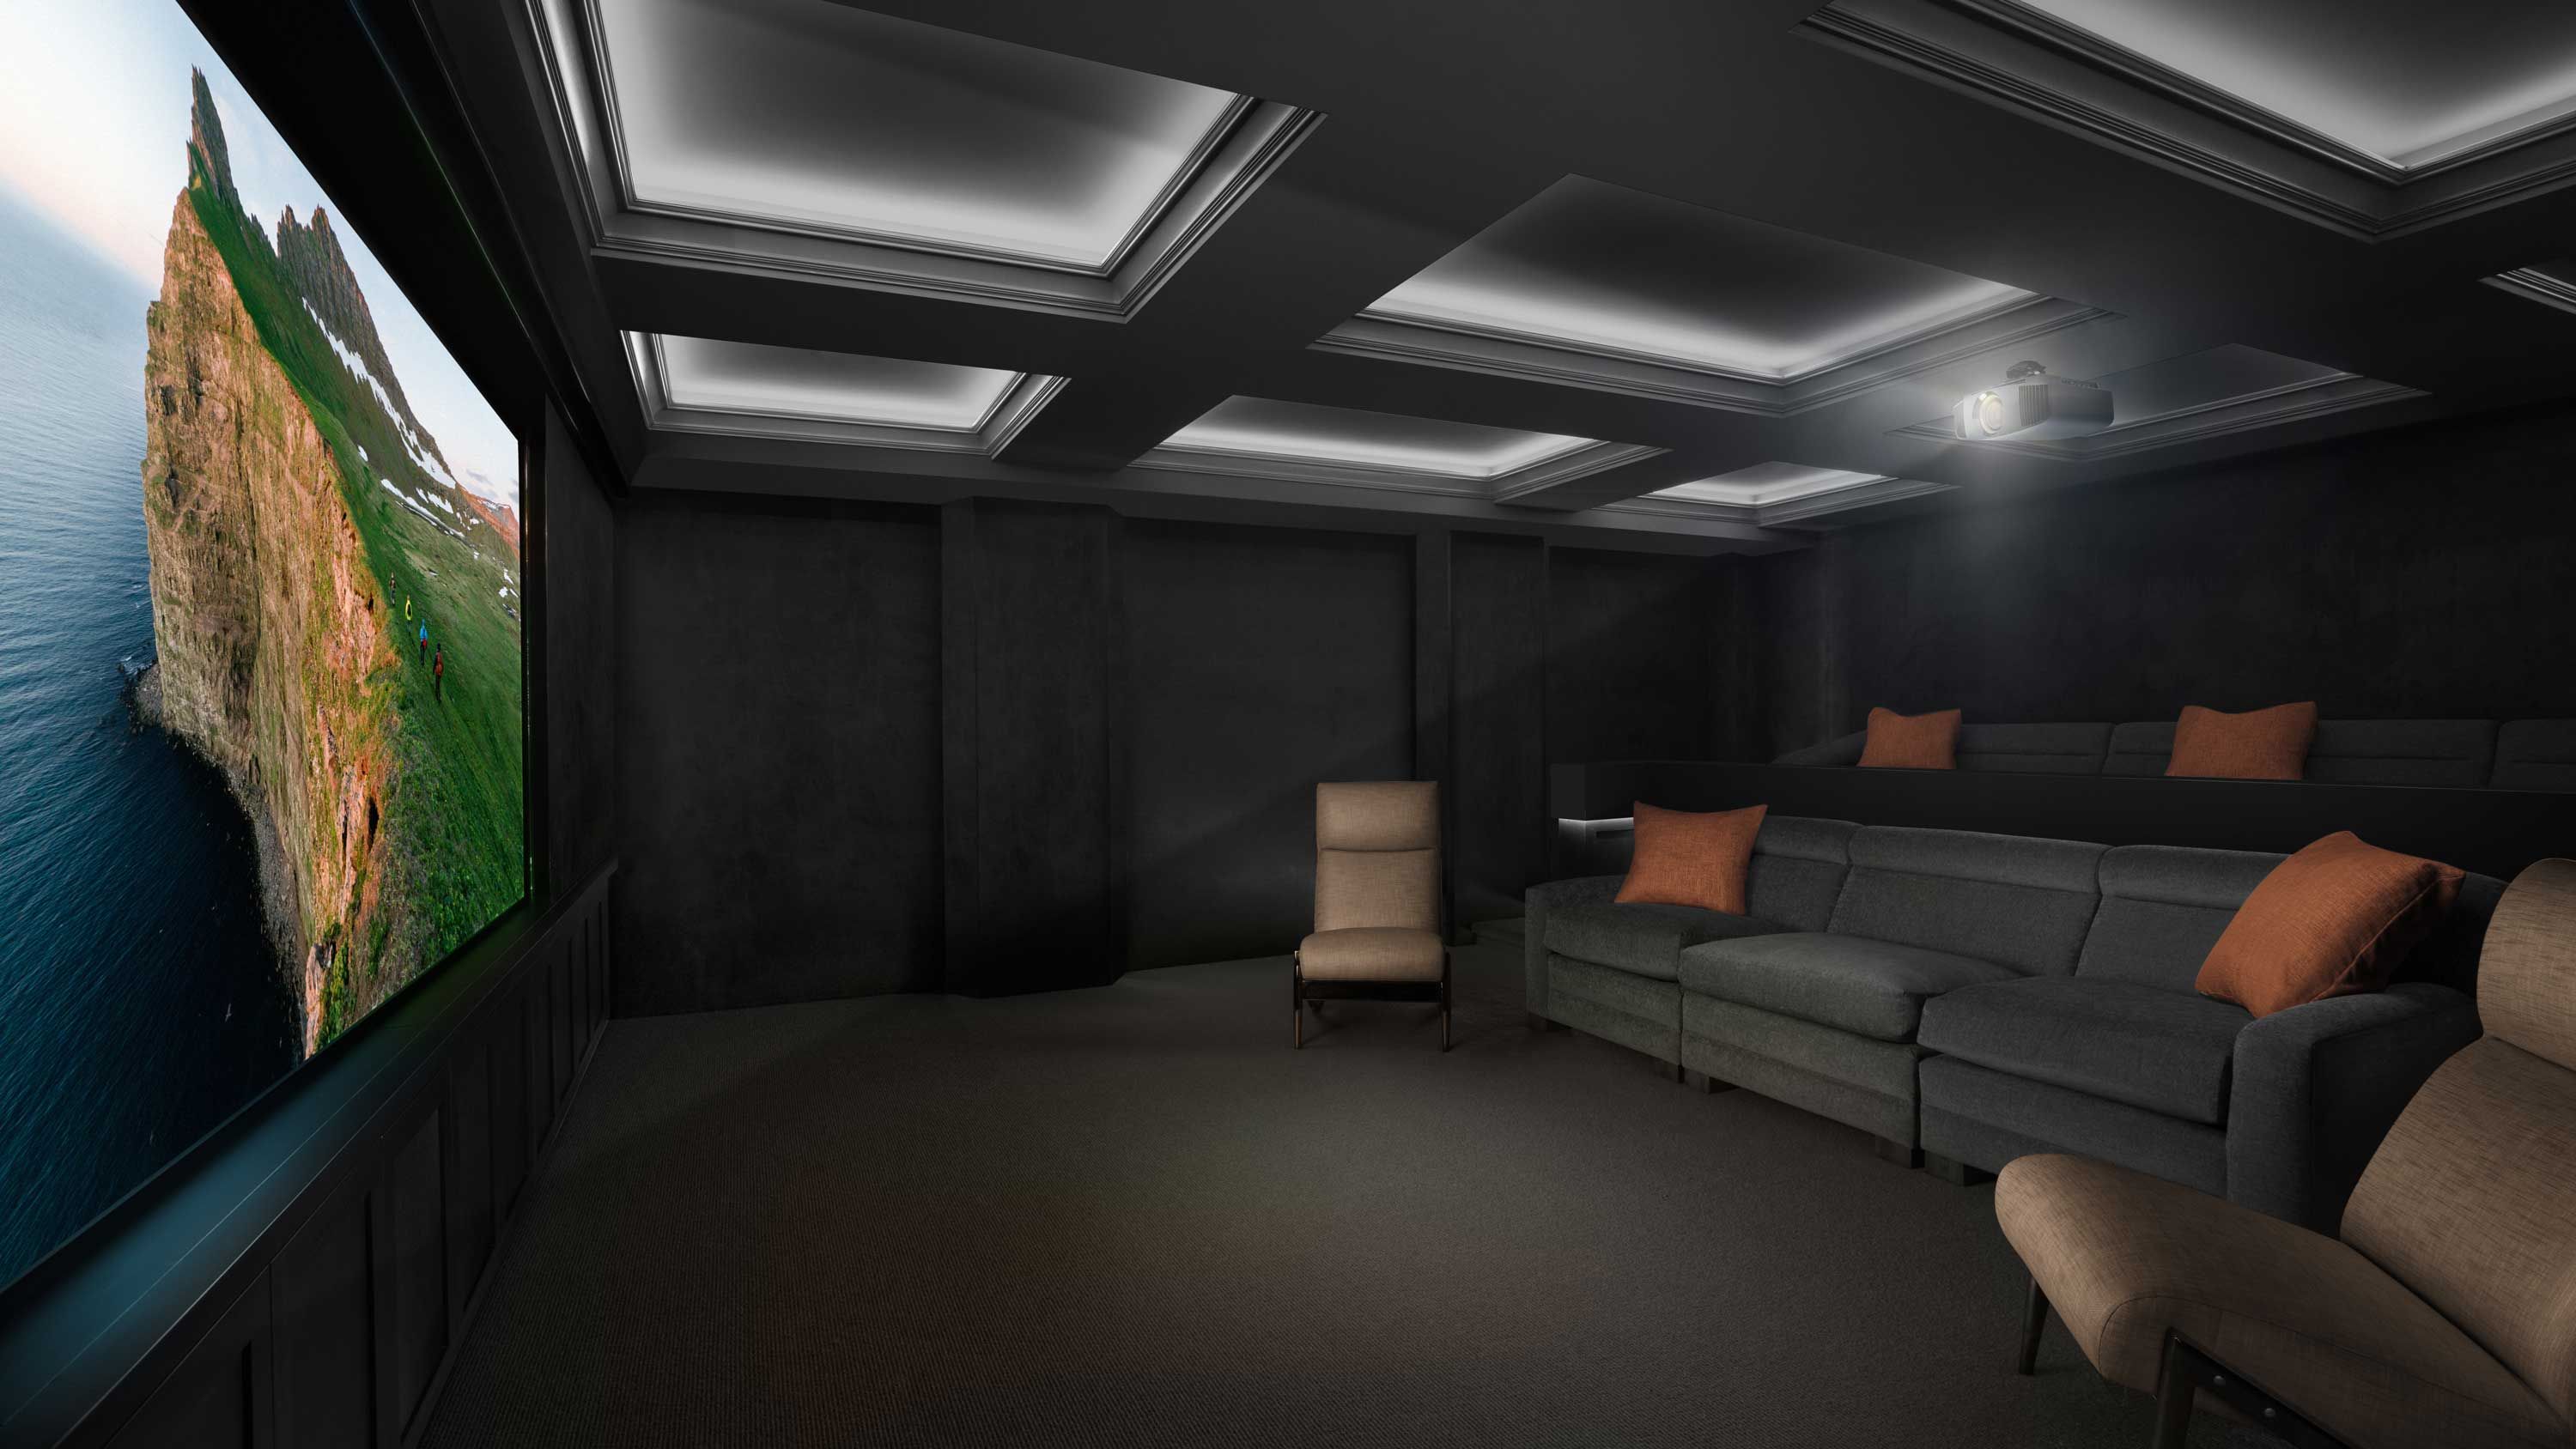 Sony home theater with LED lighting in the ceiling